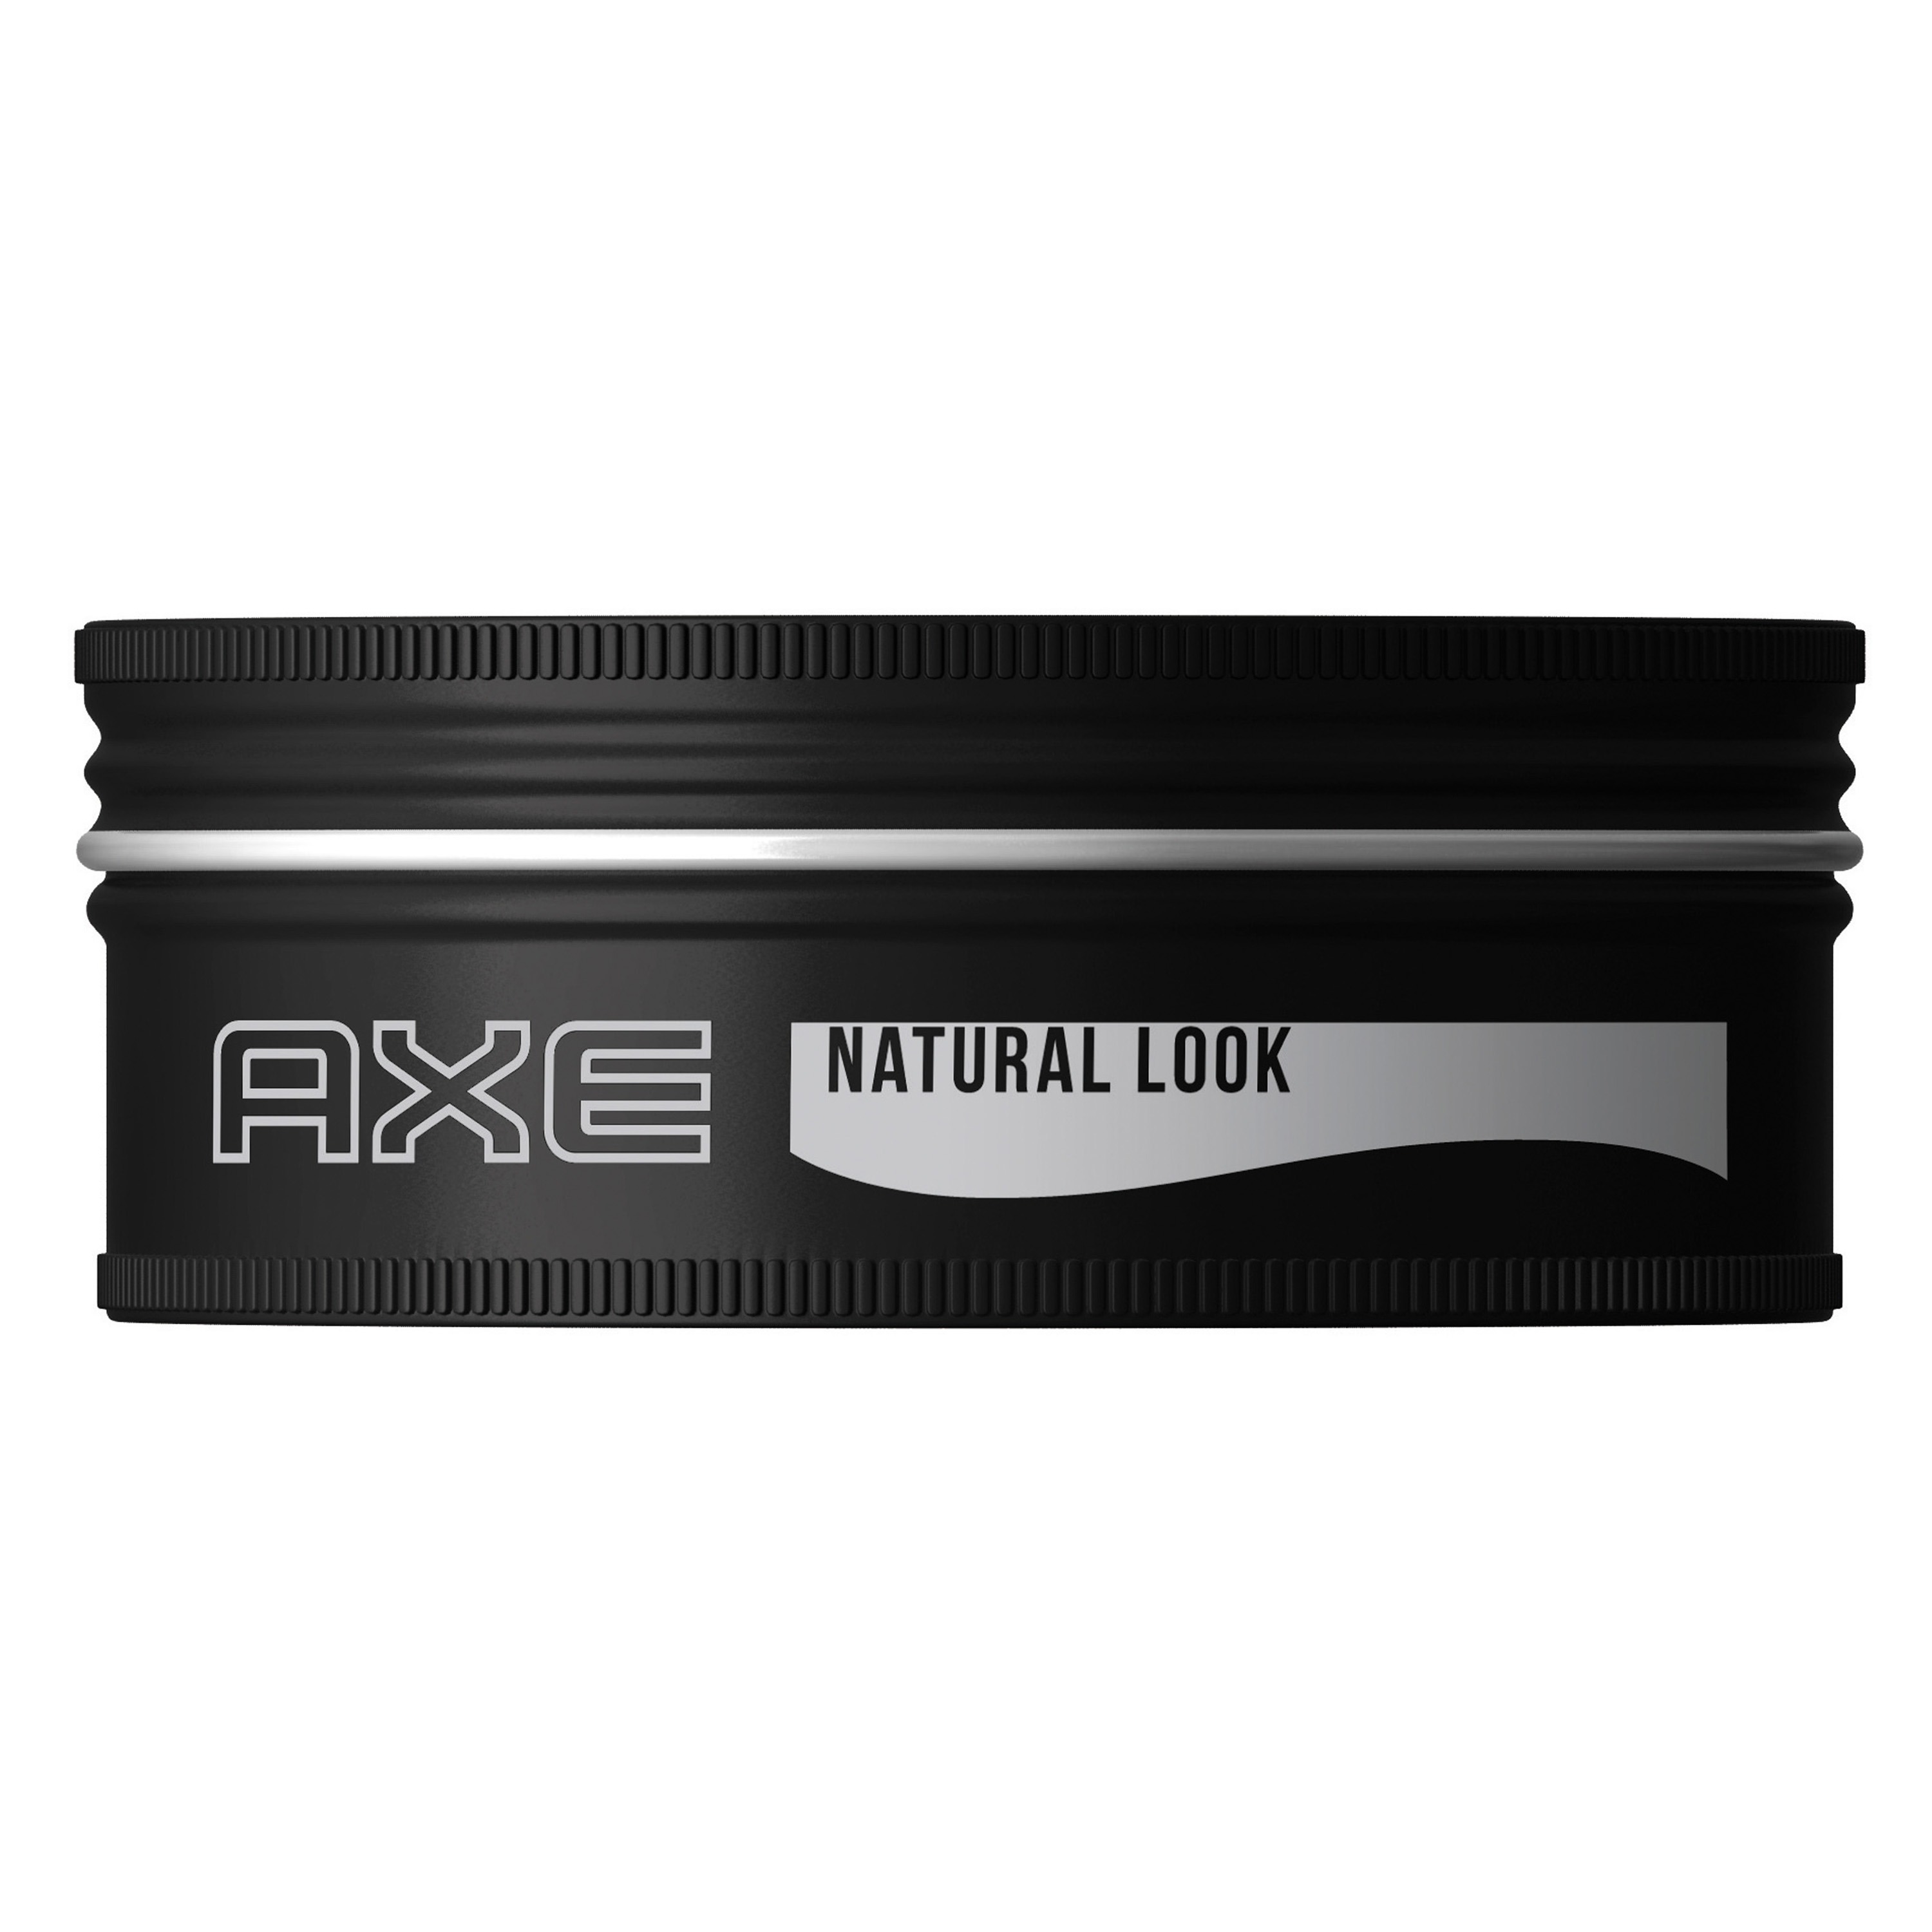 Axe Natural Look Color Protection Softening Hair Styling Cream, 2.64 oz, Travel Size - image 2 of 4